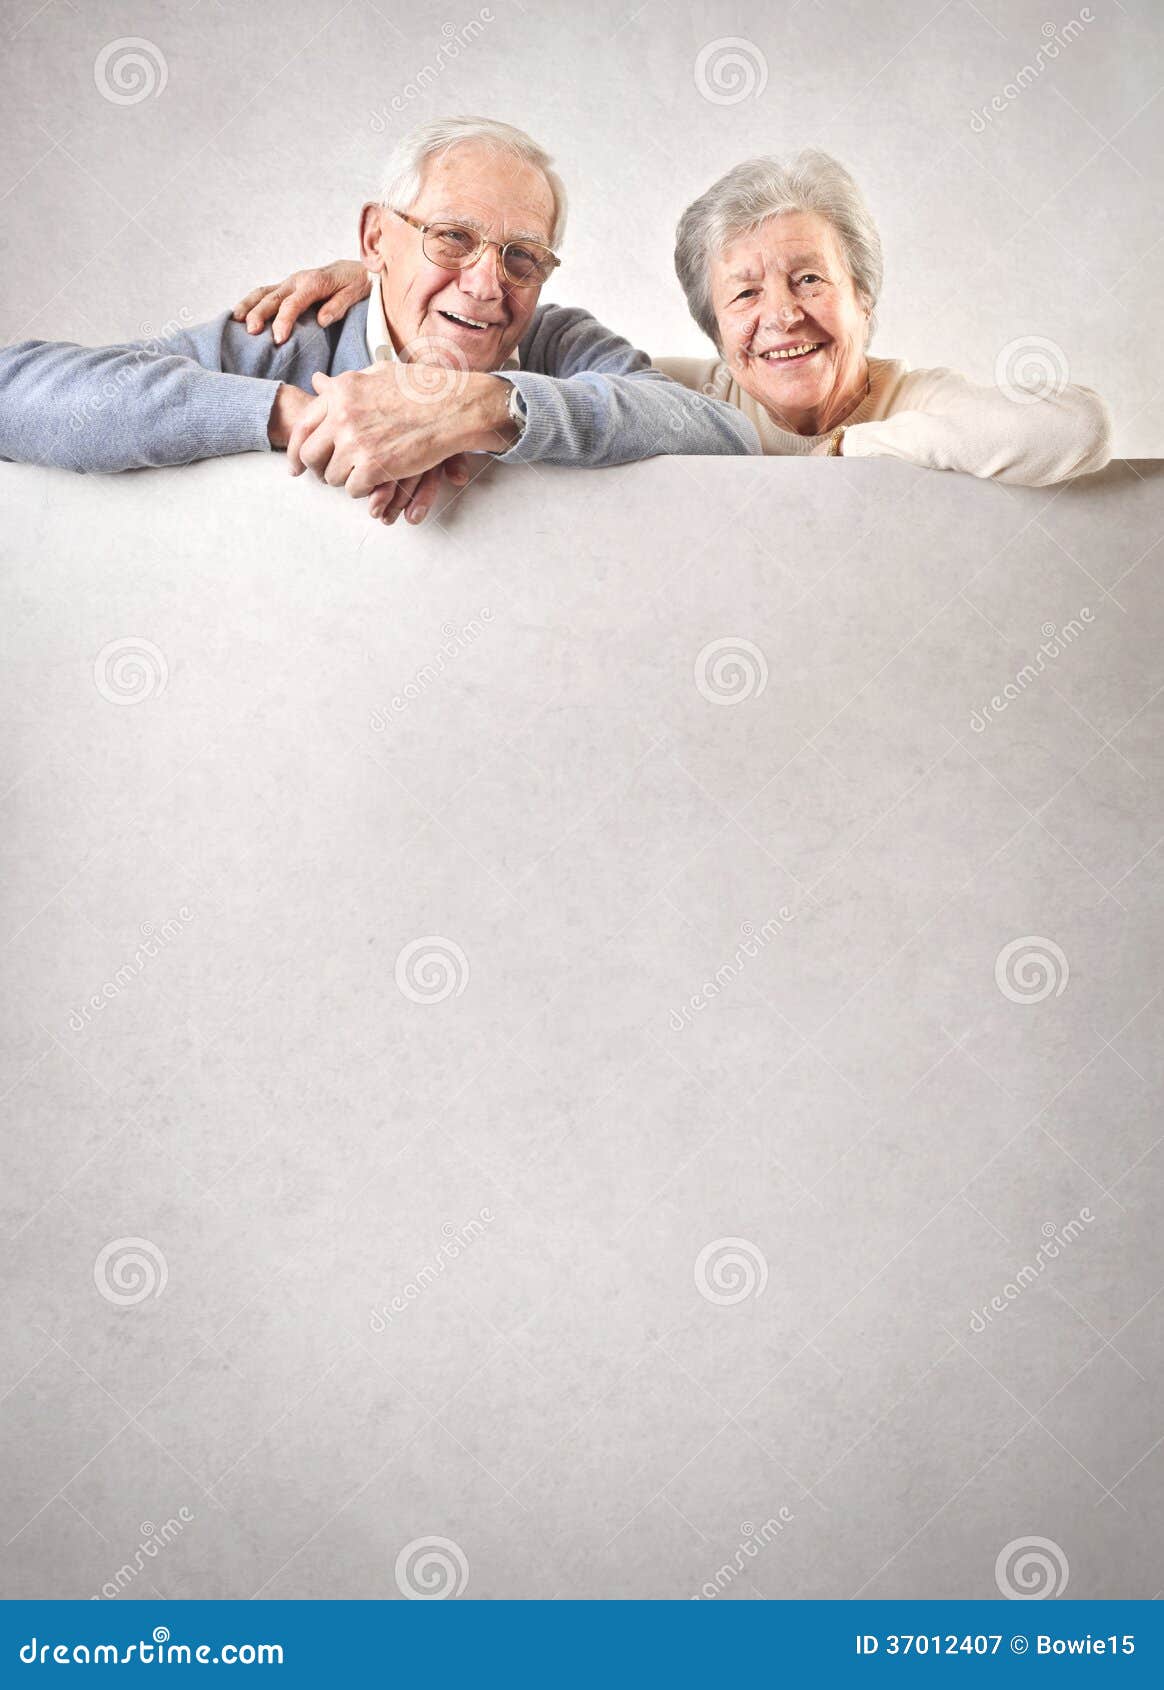 Old Man And Woman Stock Image Image Of Couple Glasses